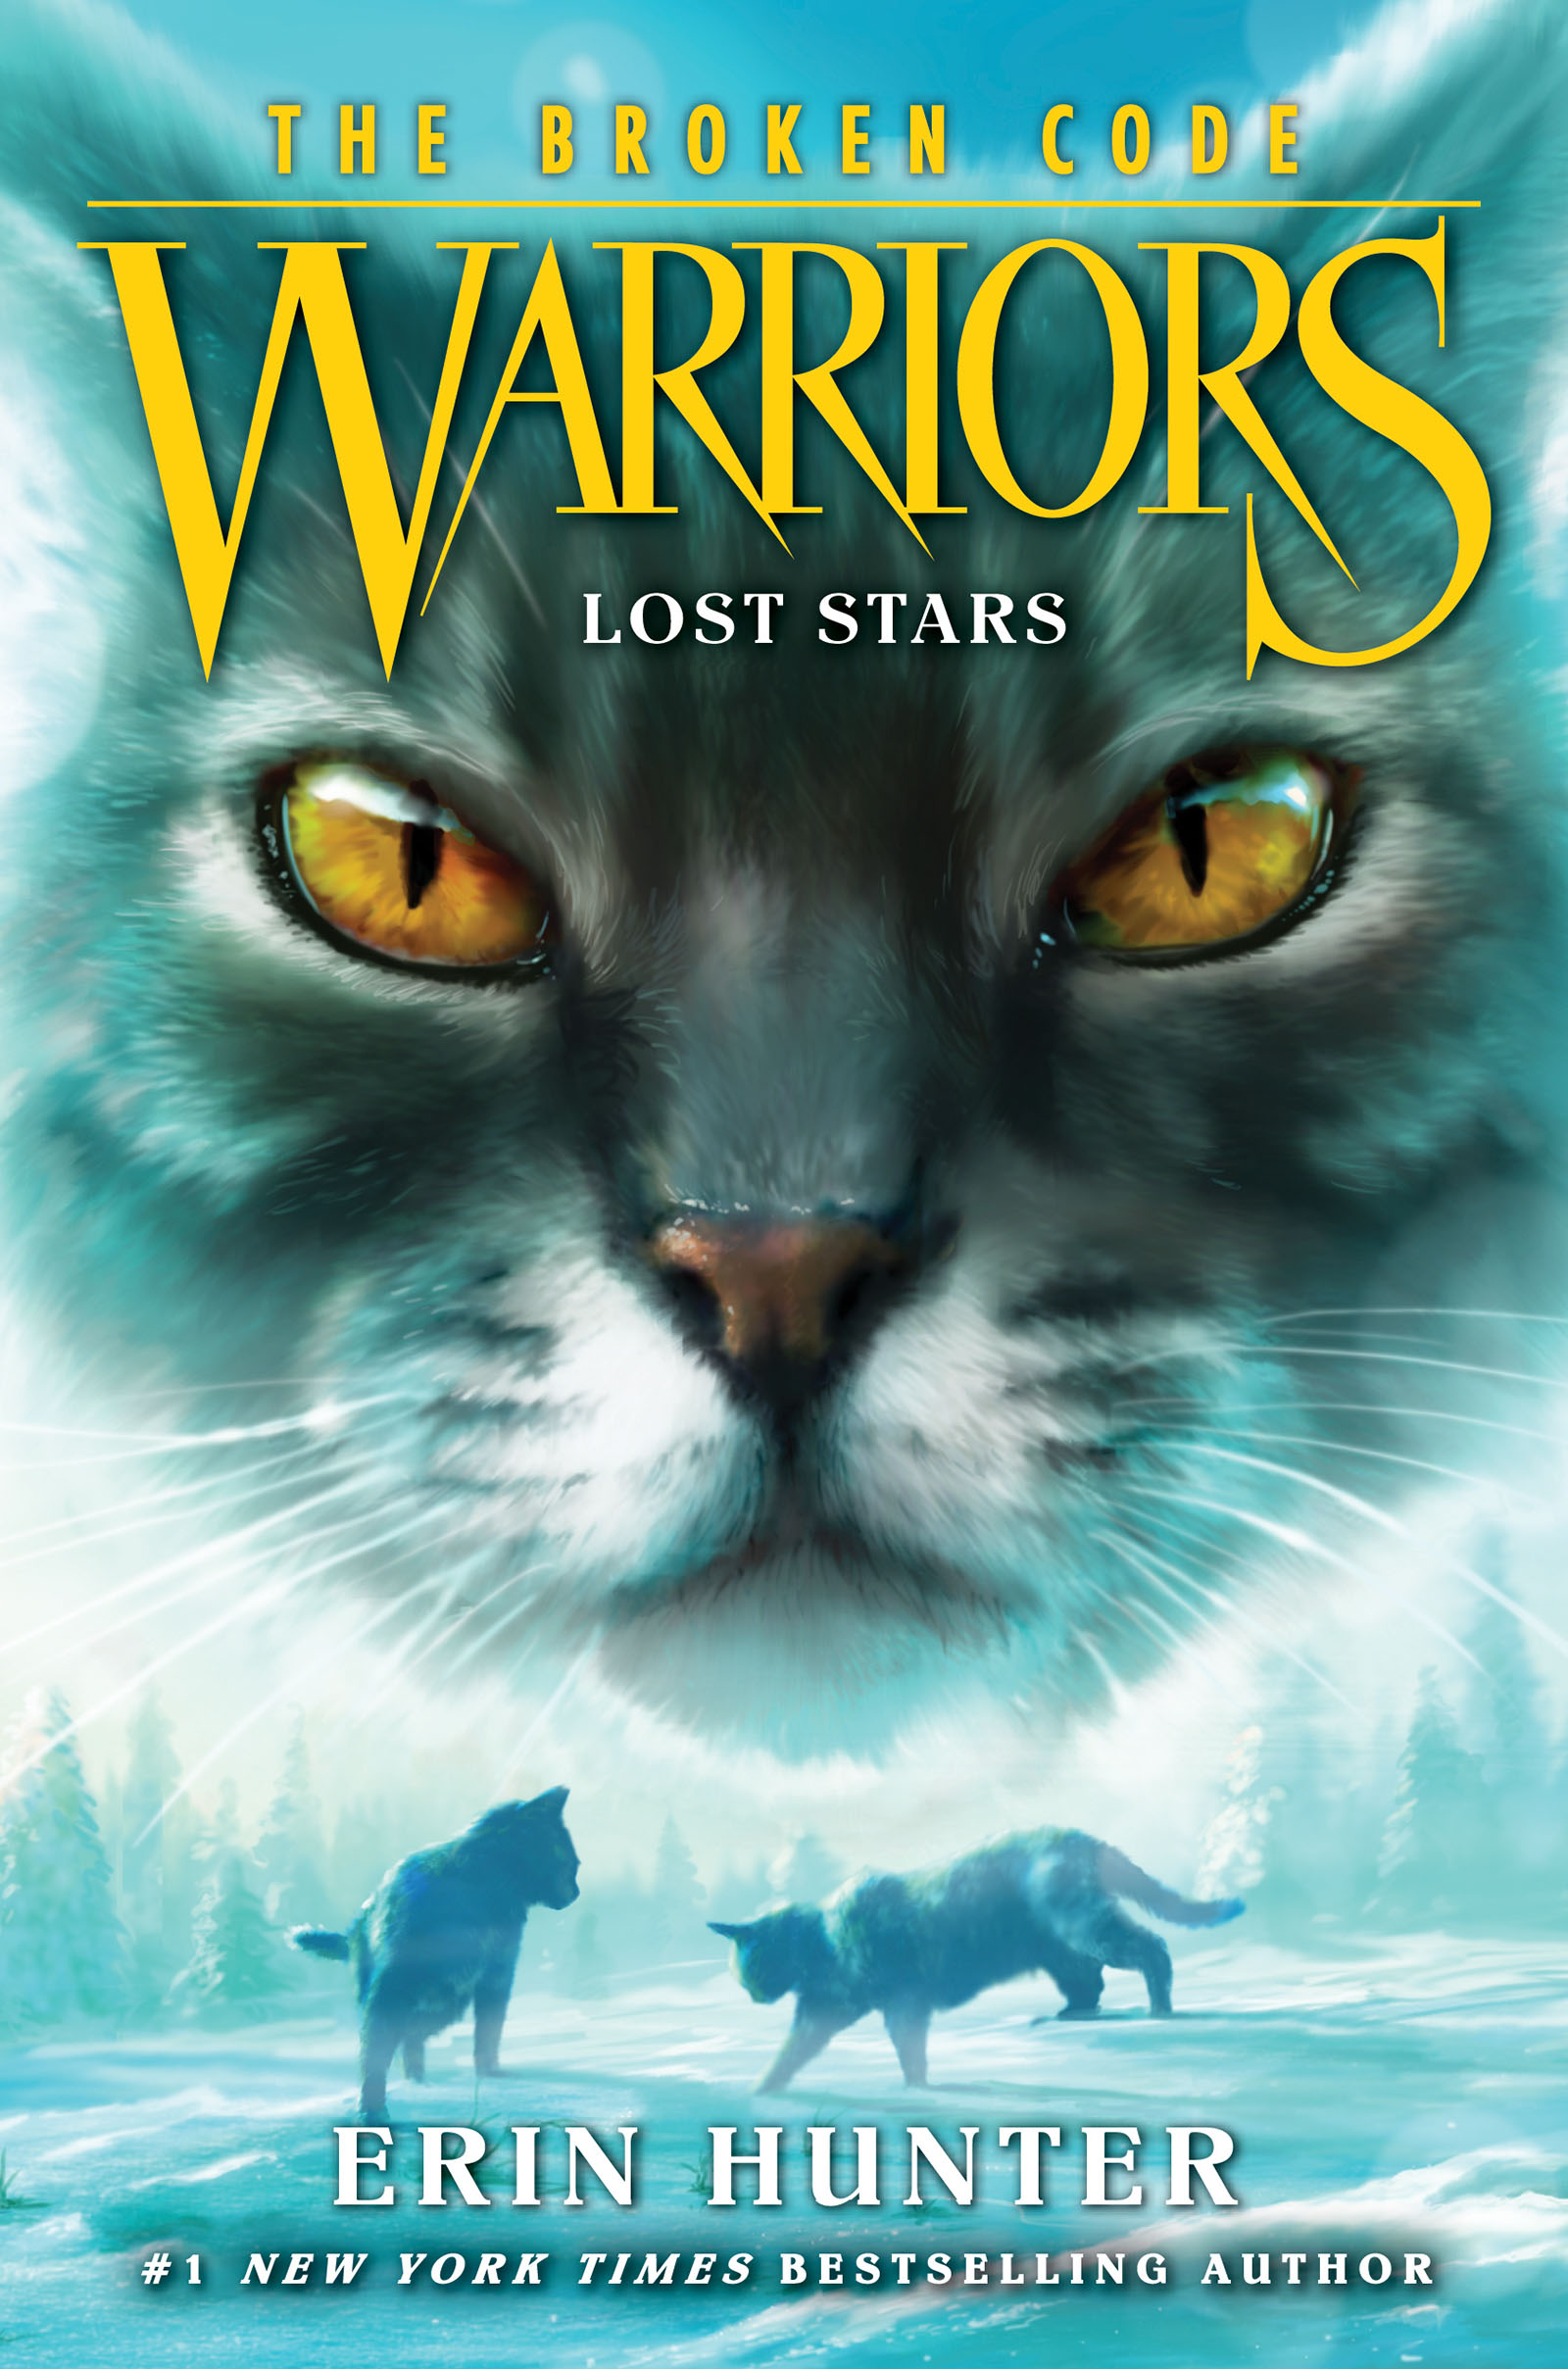 Lost Warrior Cats Facts — according-to-warriors-wiki: According to